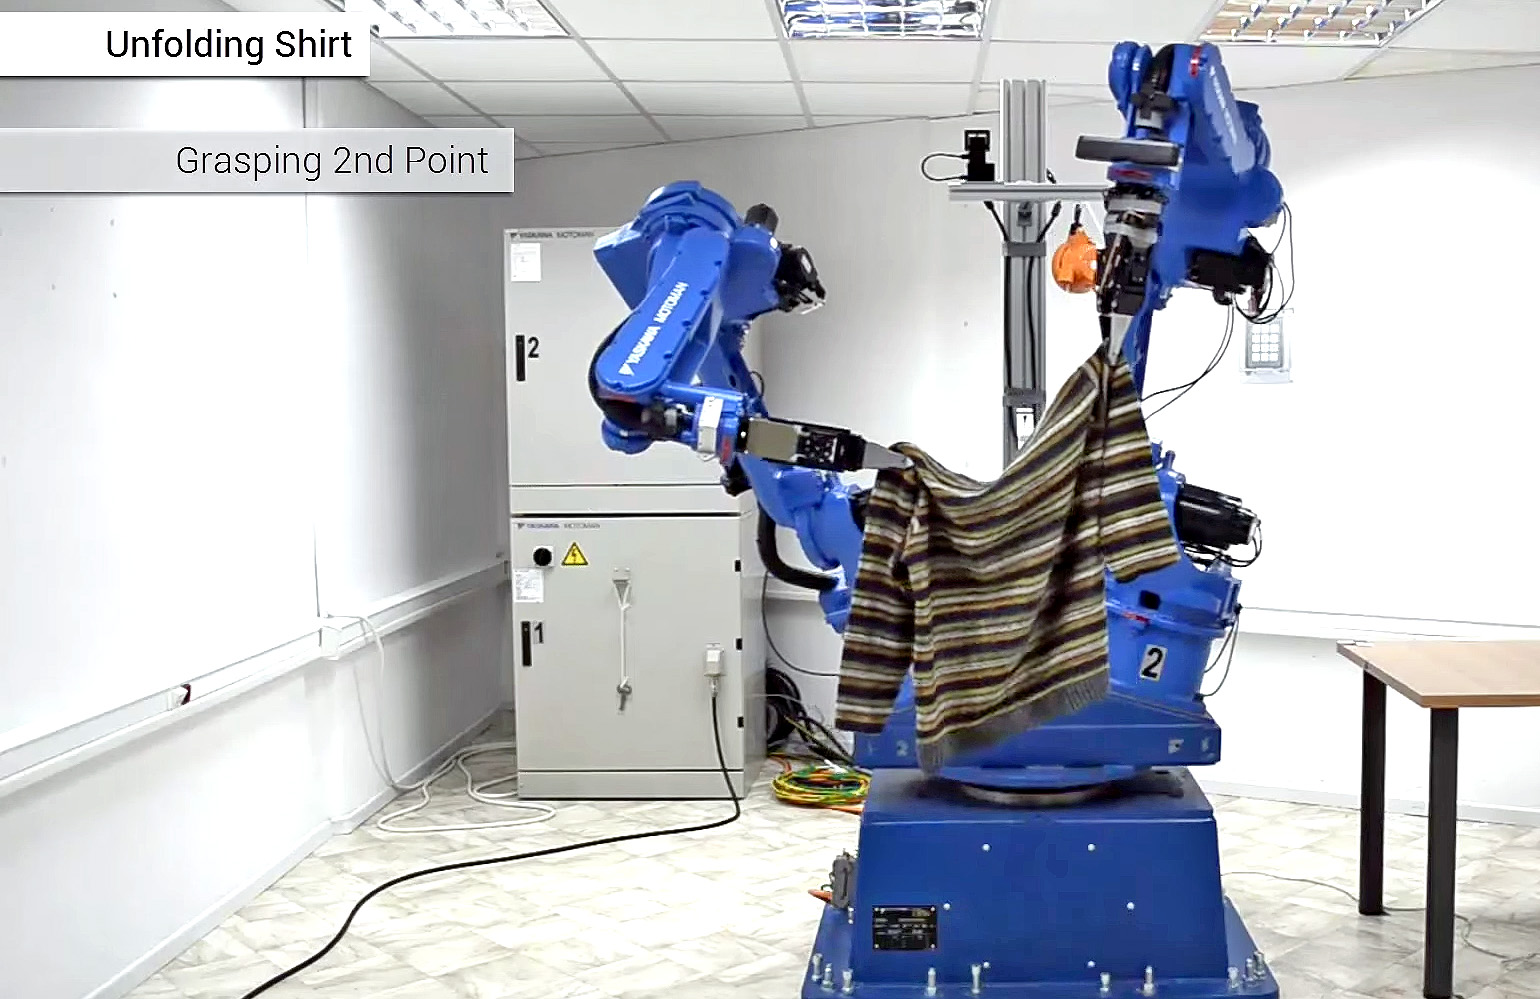 Dexterous Blue robot invented help fold clothes and bring more jobs Scotland